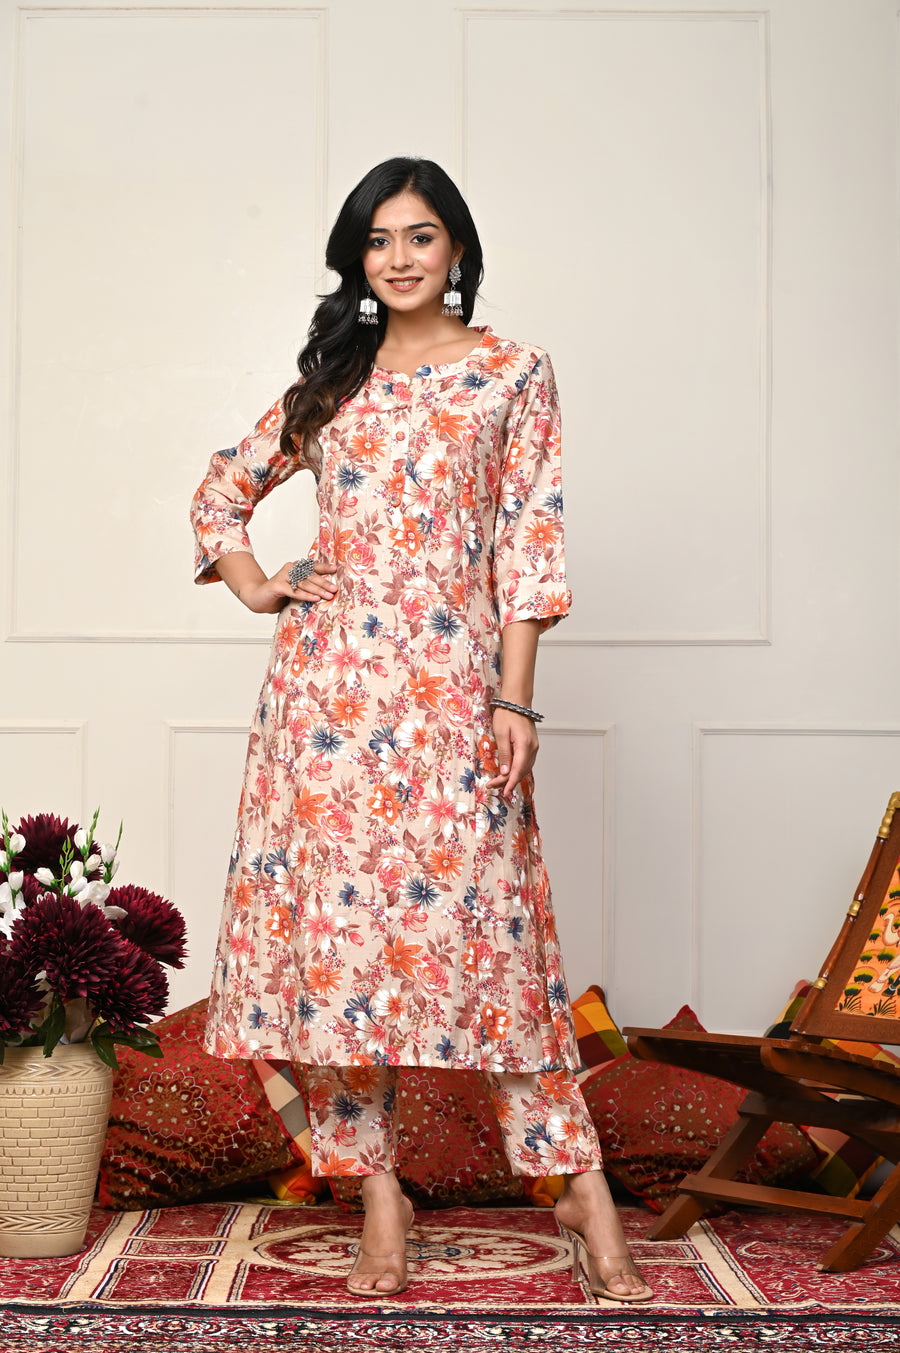 Aaronee's Floral Harmony Collection: Embrace Nature's Elegance